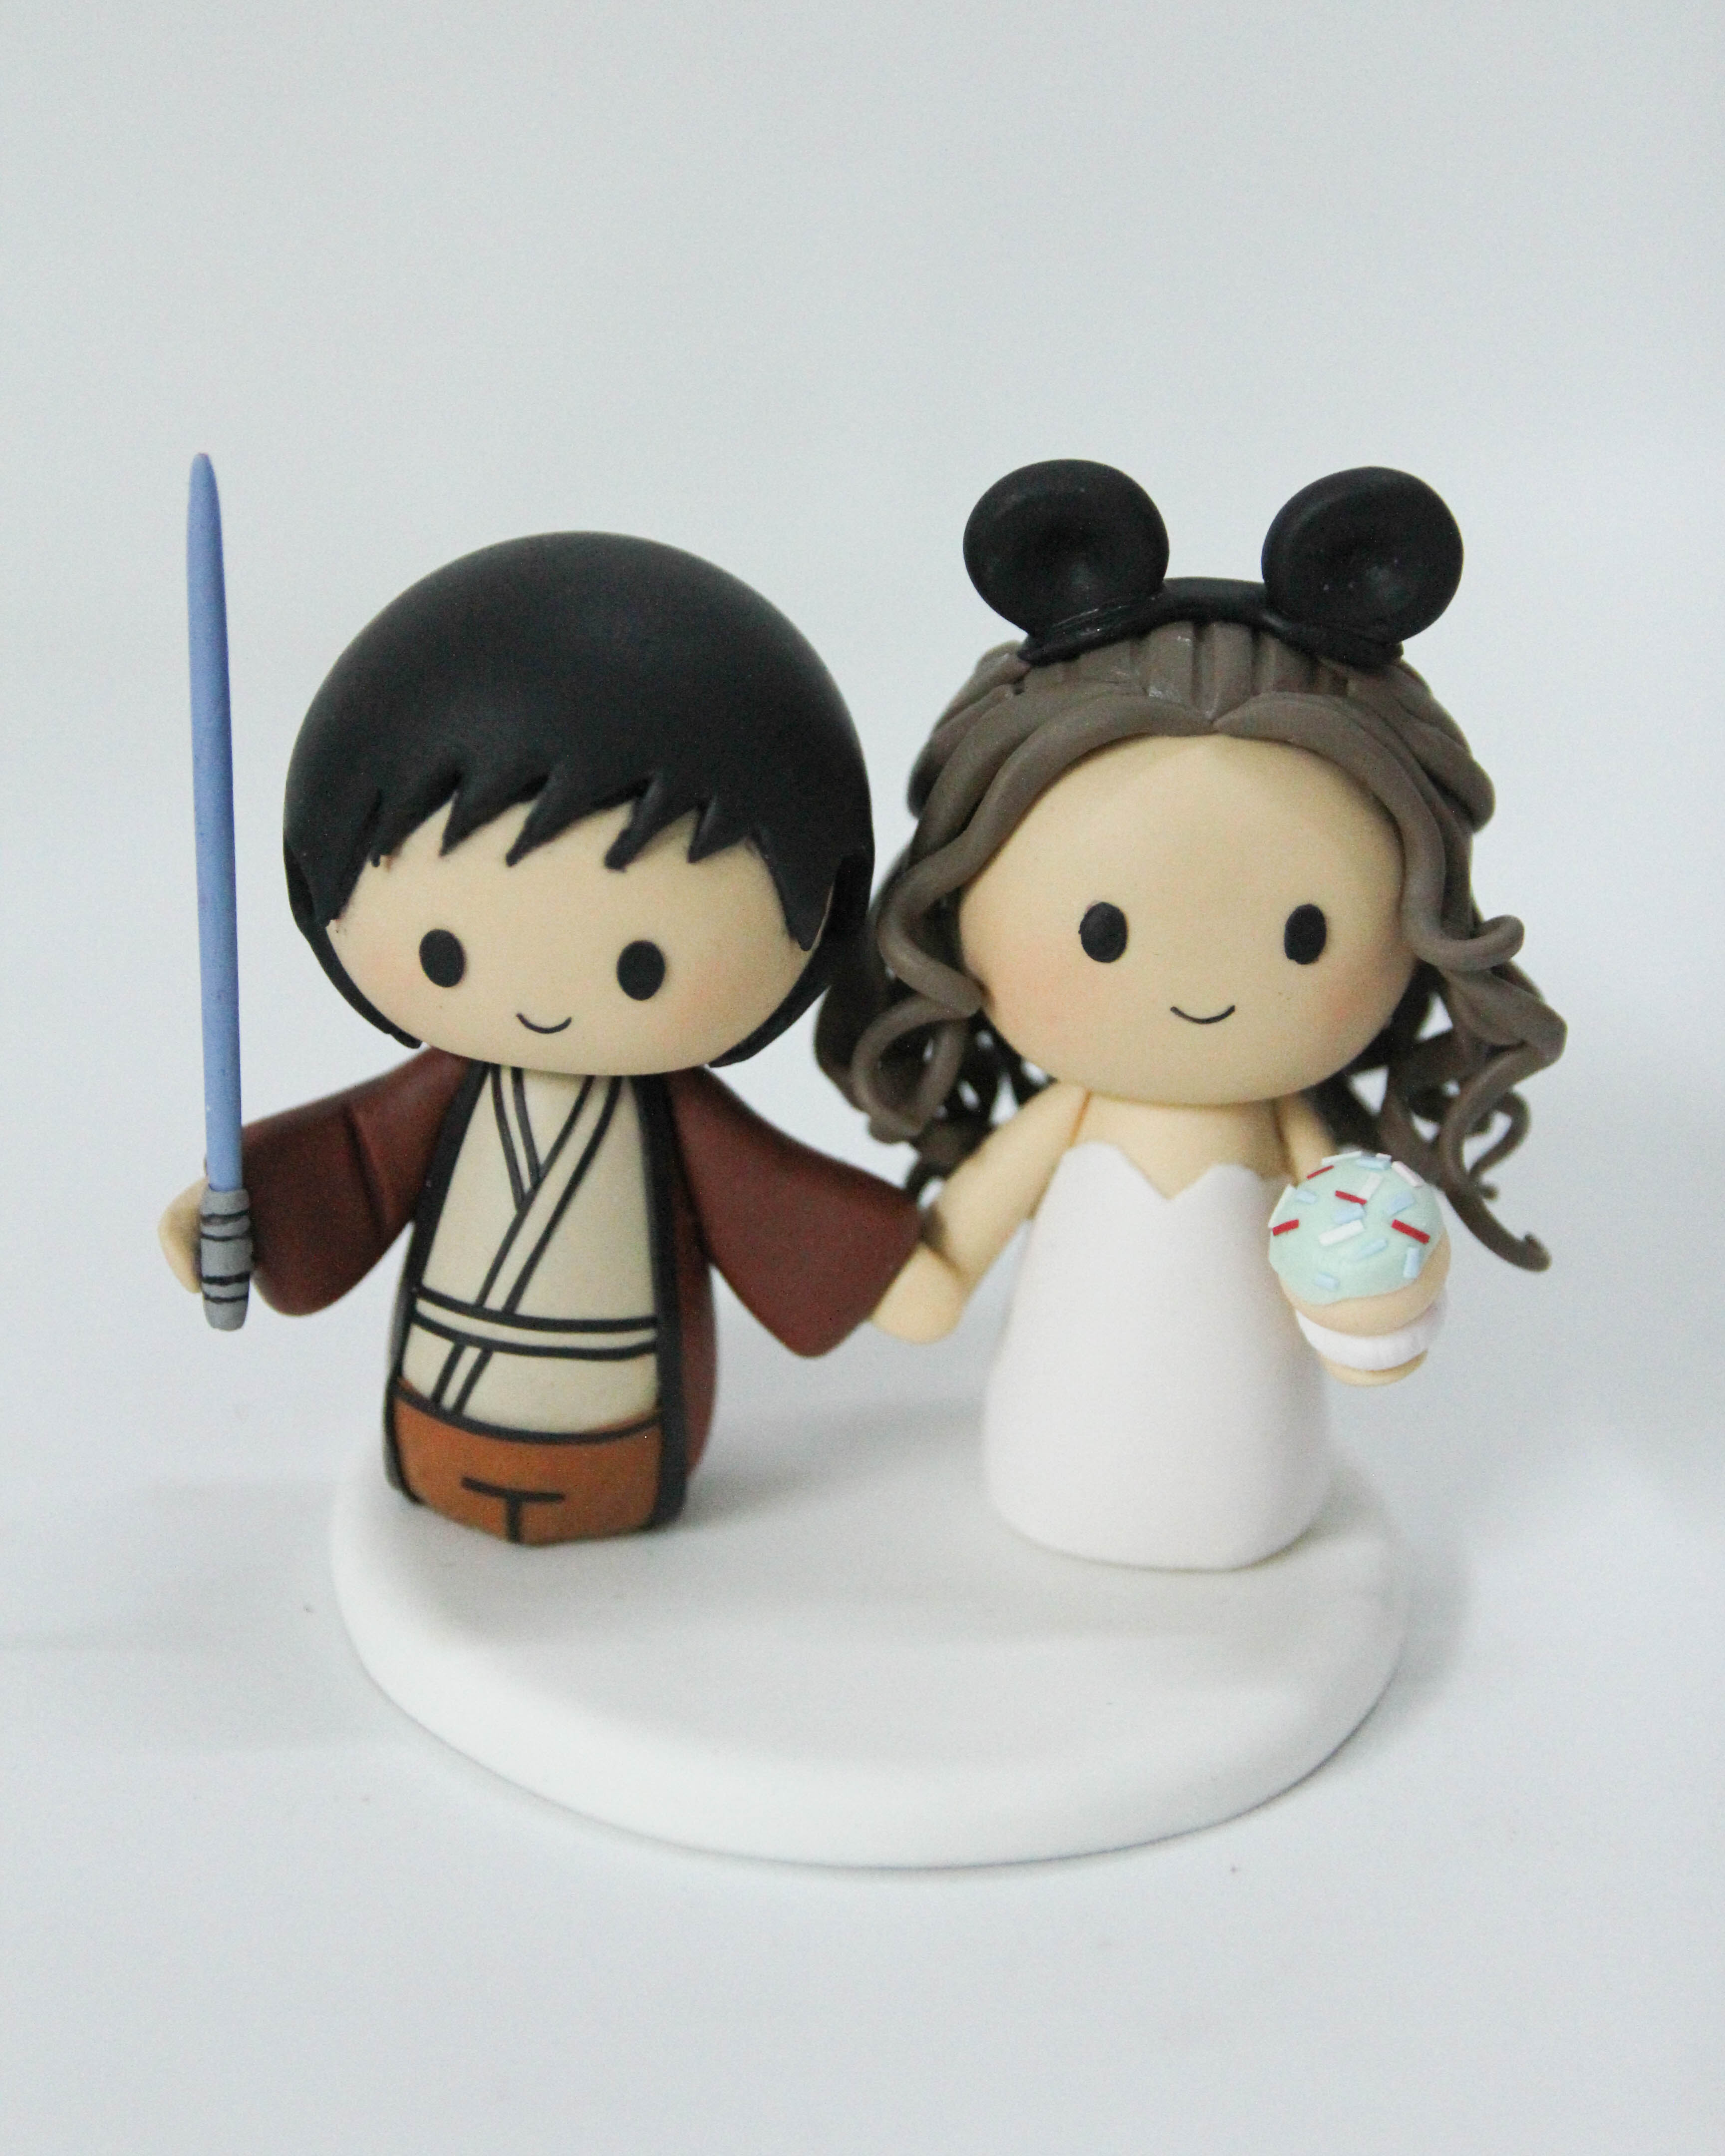 Star Wars and Mickey wedding cake topper, Cupcake lover wedding cake topper